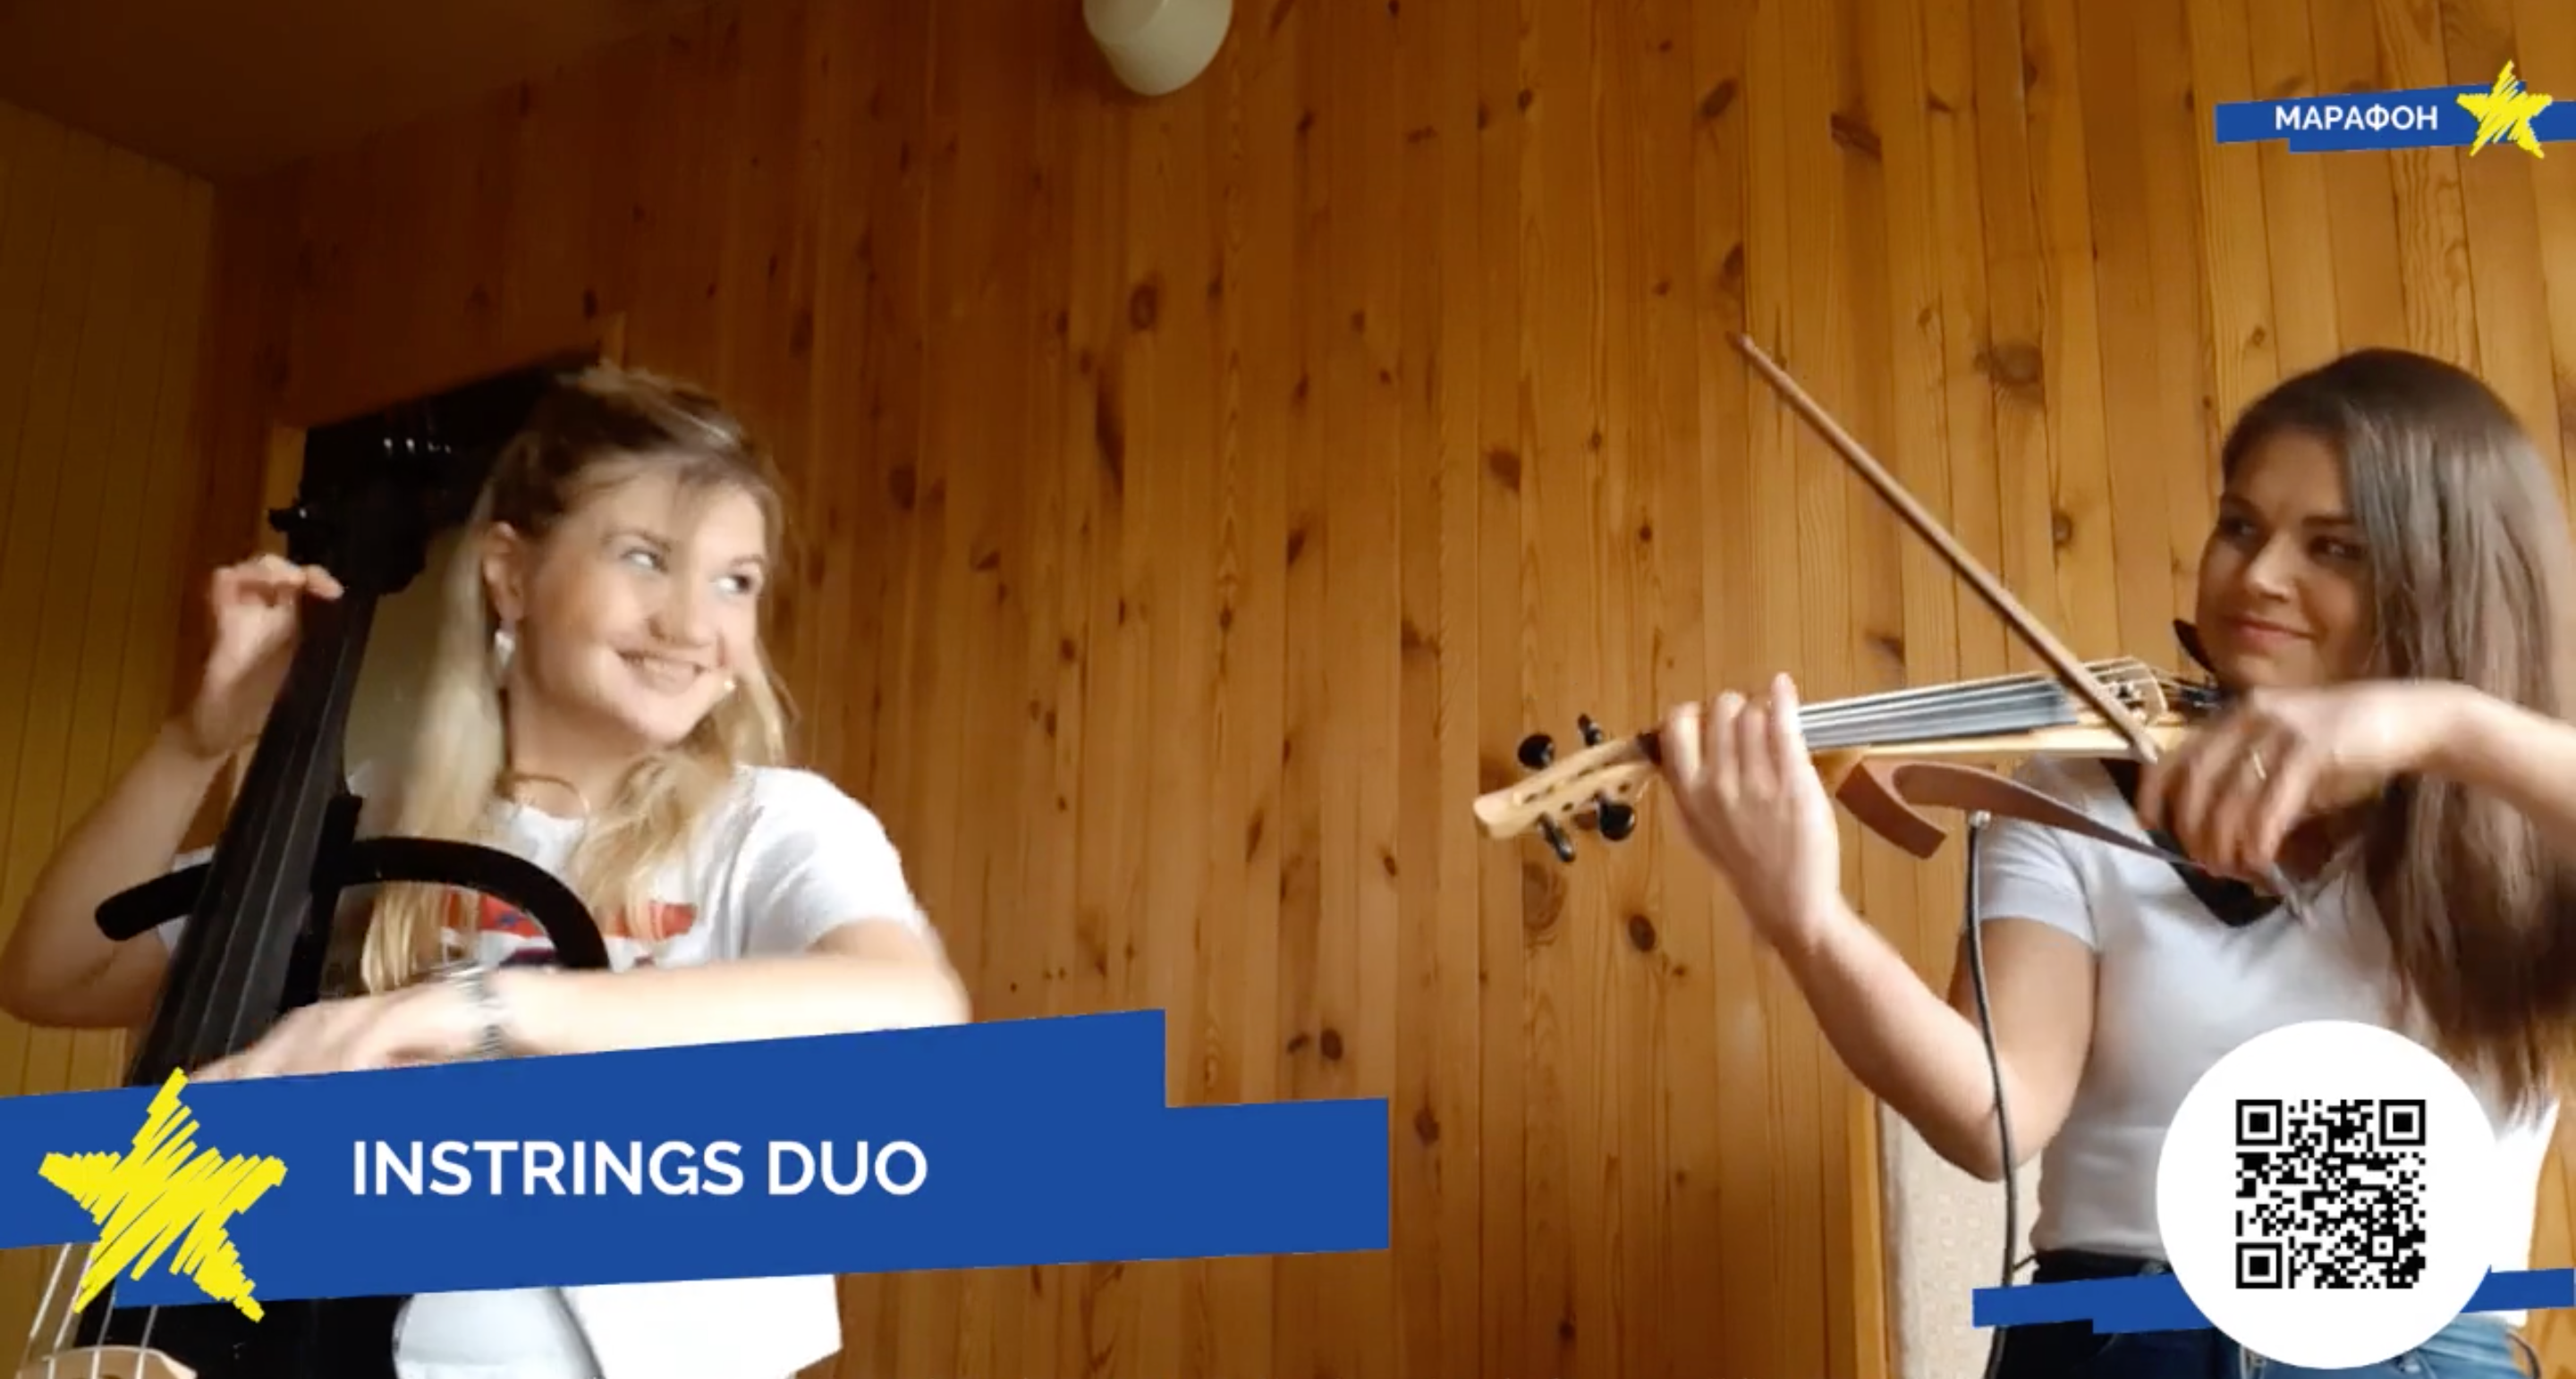 Instrings duo on Europe day